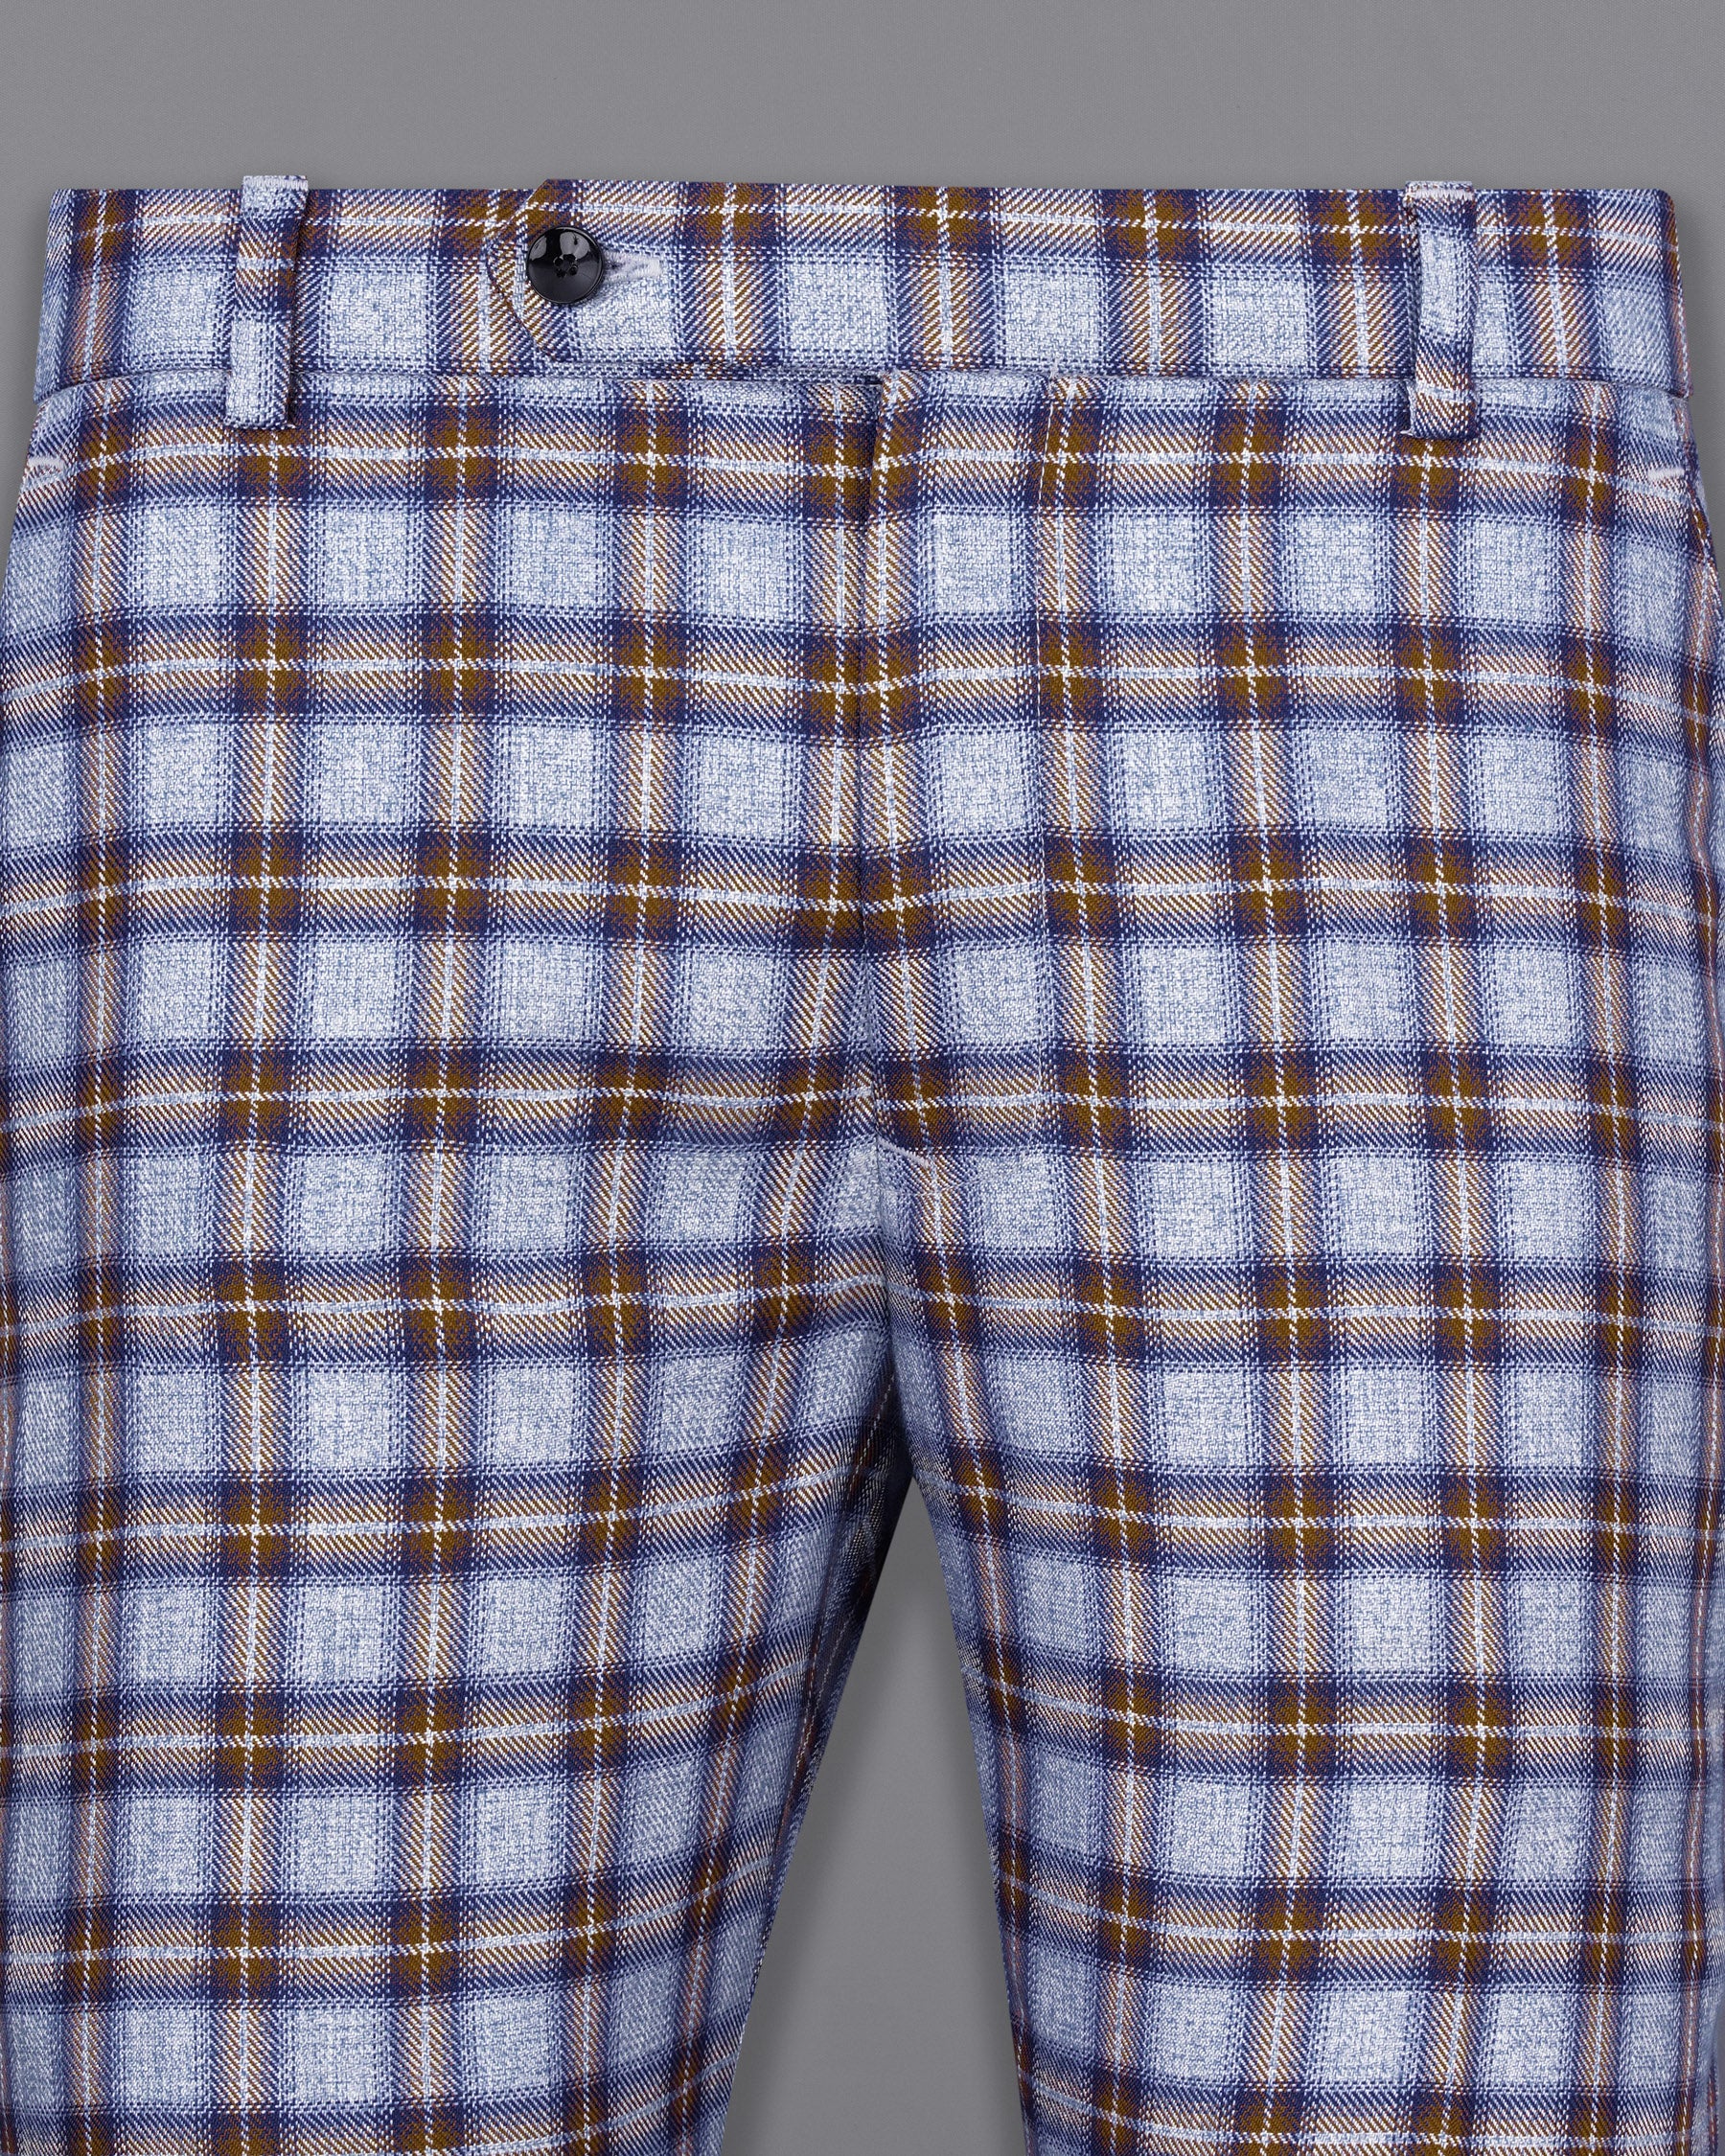 Chateau Blue with Cocoa Brown Plaid Pant T2149-28, T2149-30, T2149-32, T2149-34, T2149-36, T2149-38, T2149-40, T2149-42, T2149-44

